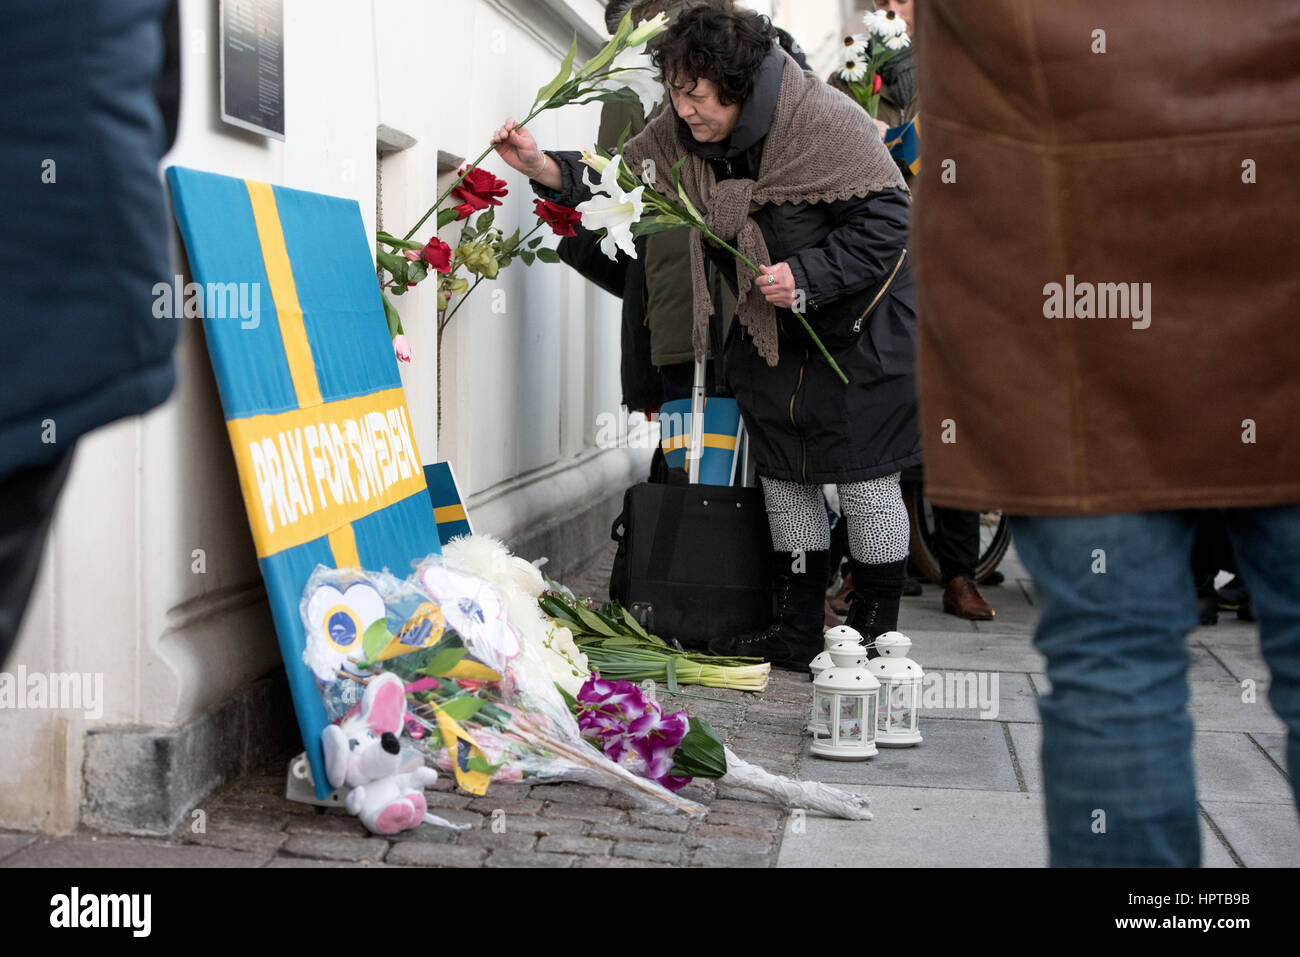 An estimated 100 people gathered outside the Swedish Embassy in Copenhagen for a mock memorial to show solidarity over an event that never happened.   Last week US president Donald Trump said, 'Look at what happened last night in Sweden,' during a speech condemning Muslim immigration to western countries.   Baffled Swedes argued that the evening in question was uneventful. To highlight the mistake, Danish artist Artpusher organised a mock memorial. He said, ”Following the terrible attack on our sister country Sweden, reported by US president Trump, the Nordic countries must stand United.' Stock Photo